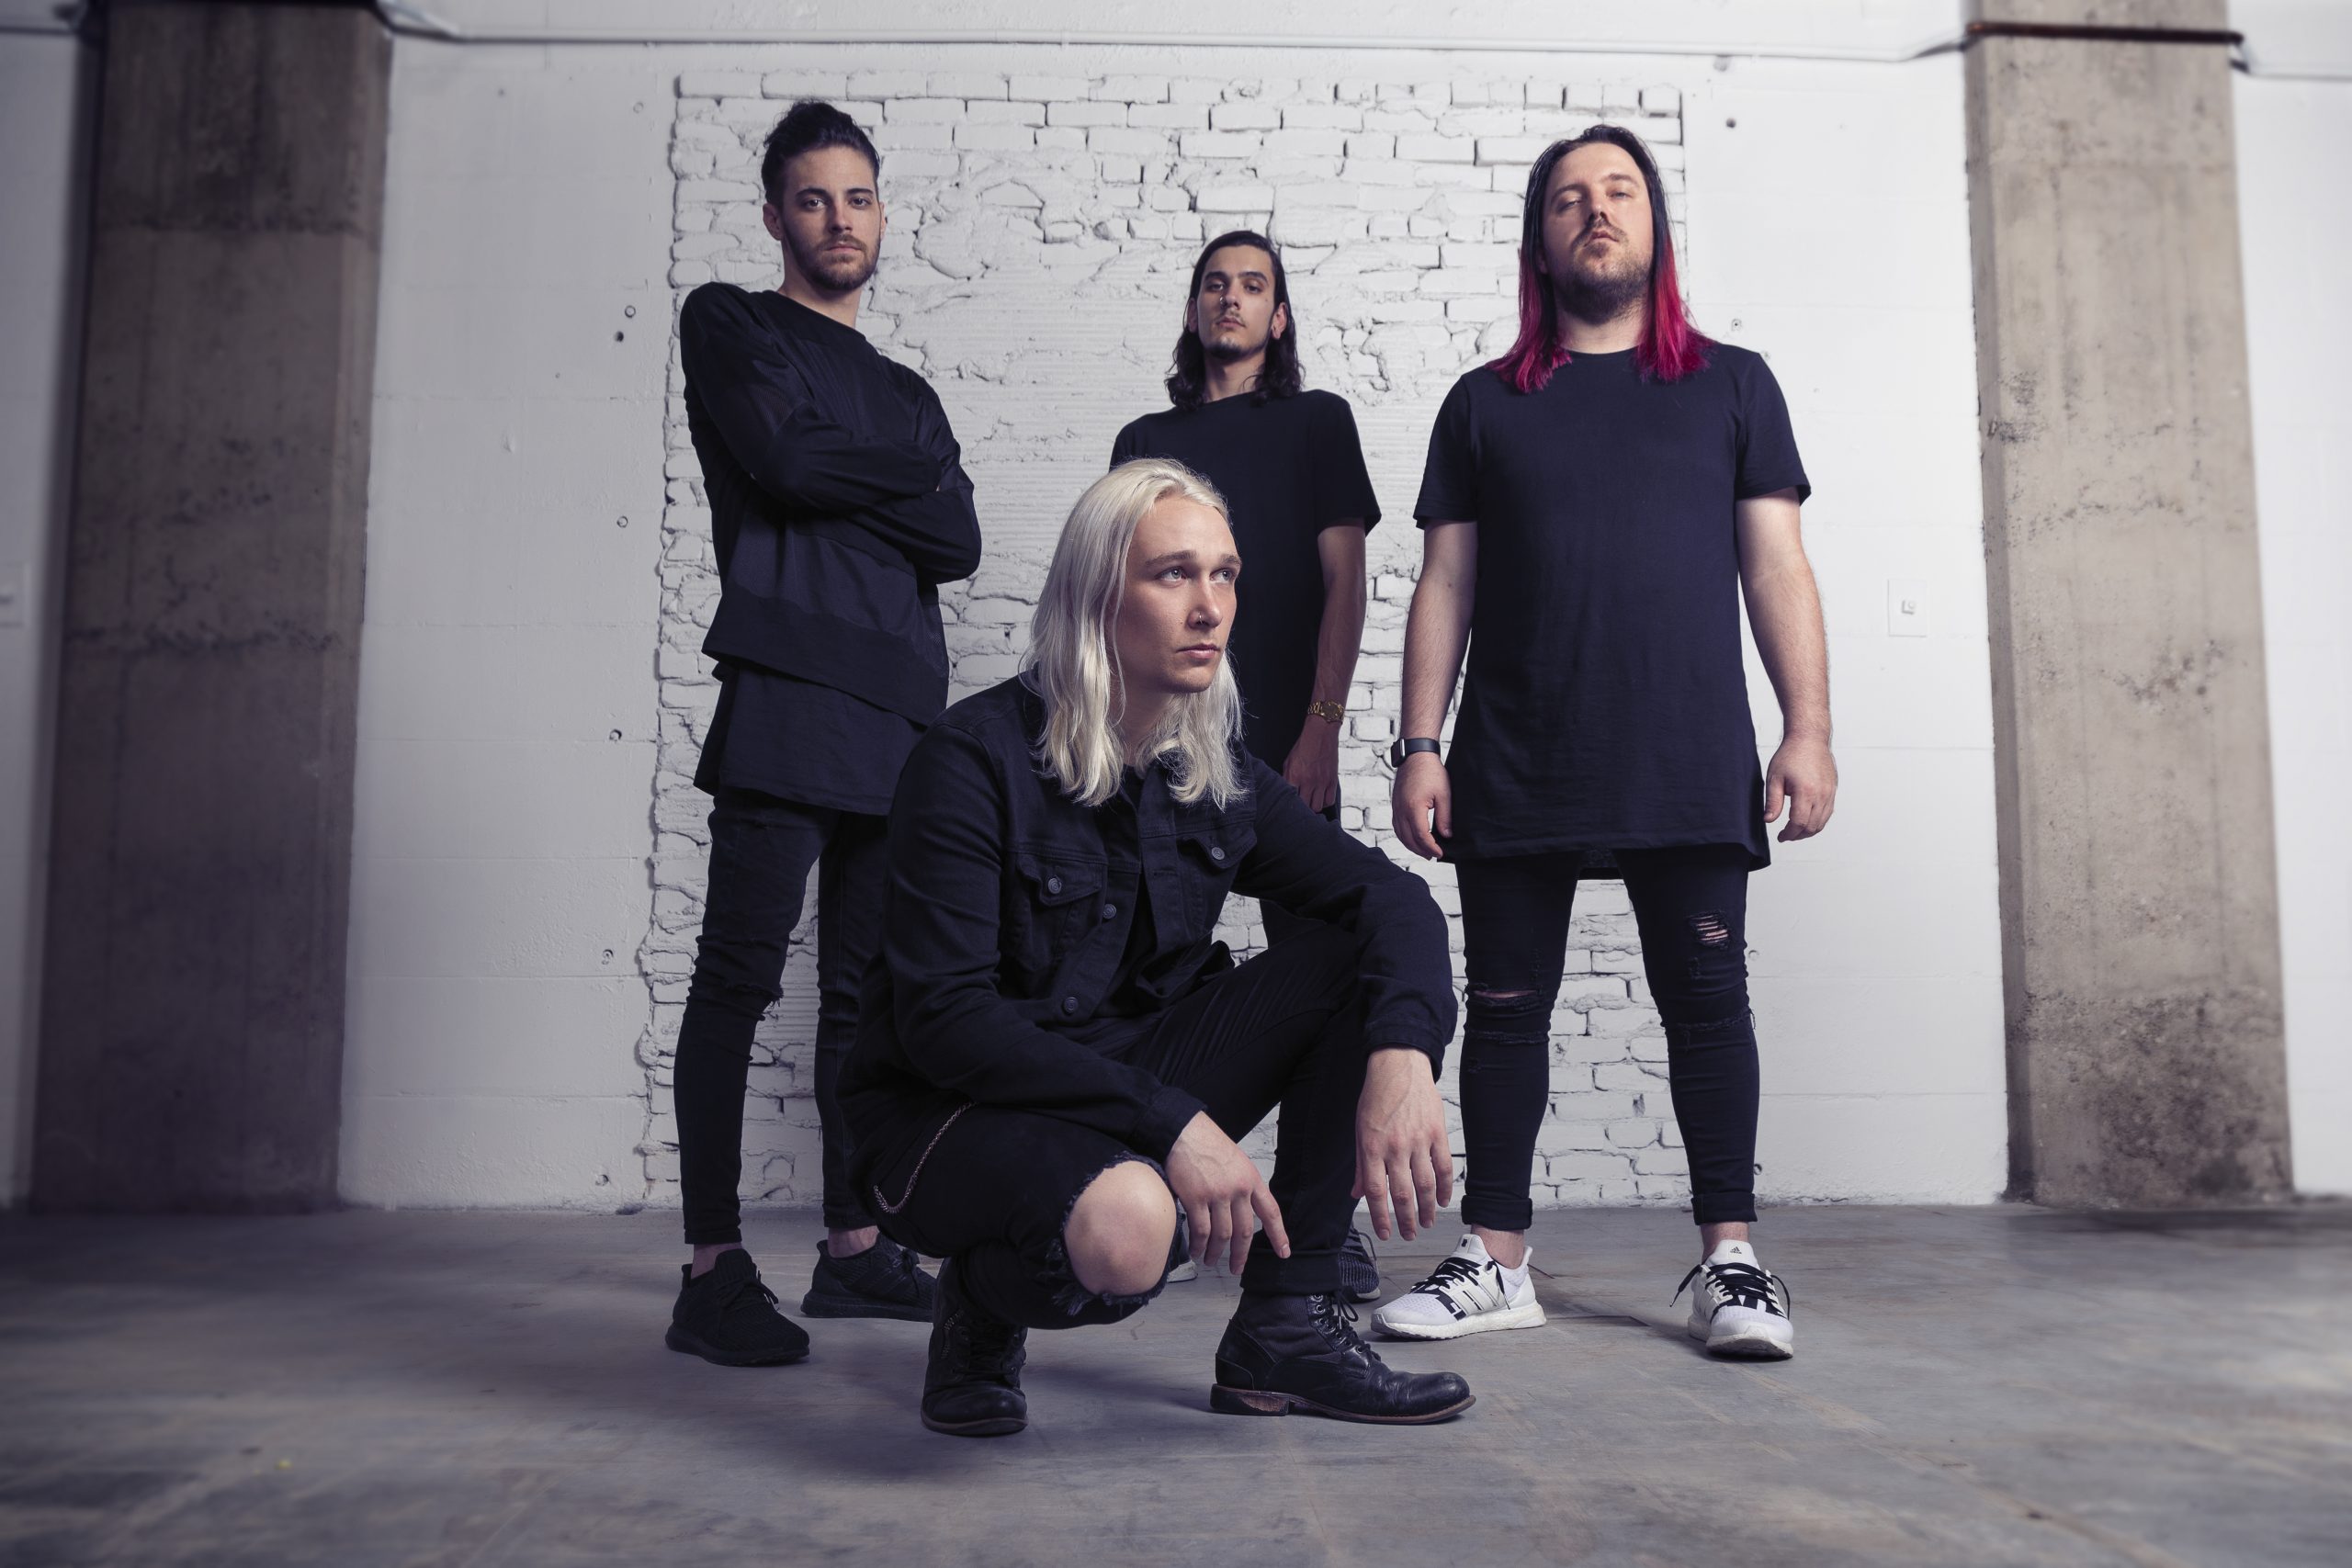 LISTEN: Alt-metalcore group Afterlife release new single “Wasting Time”